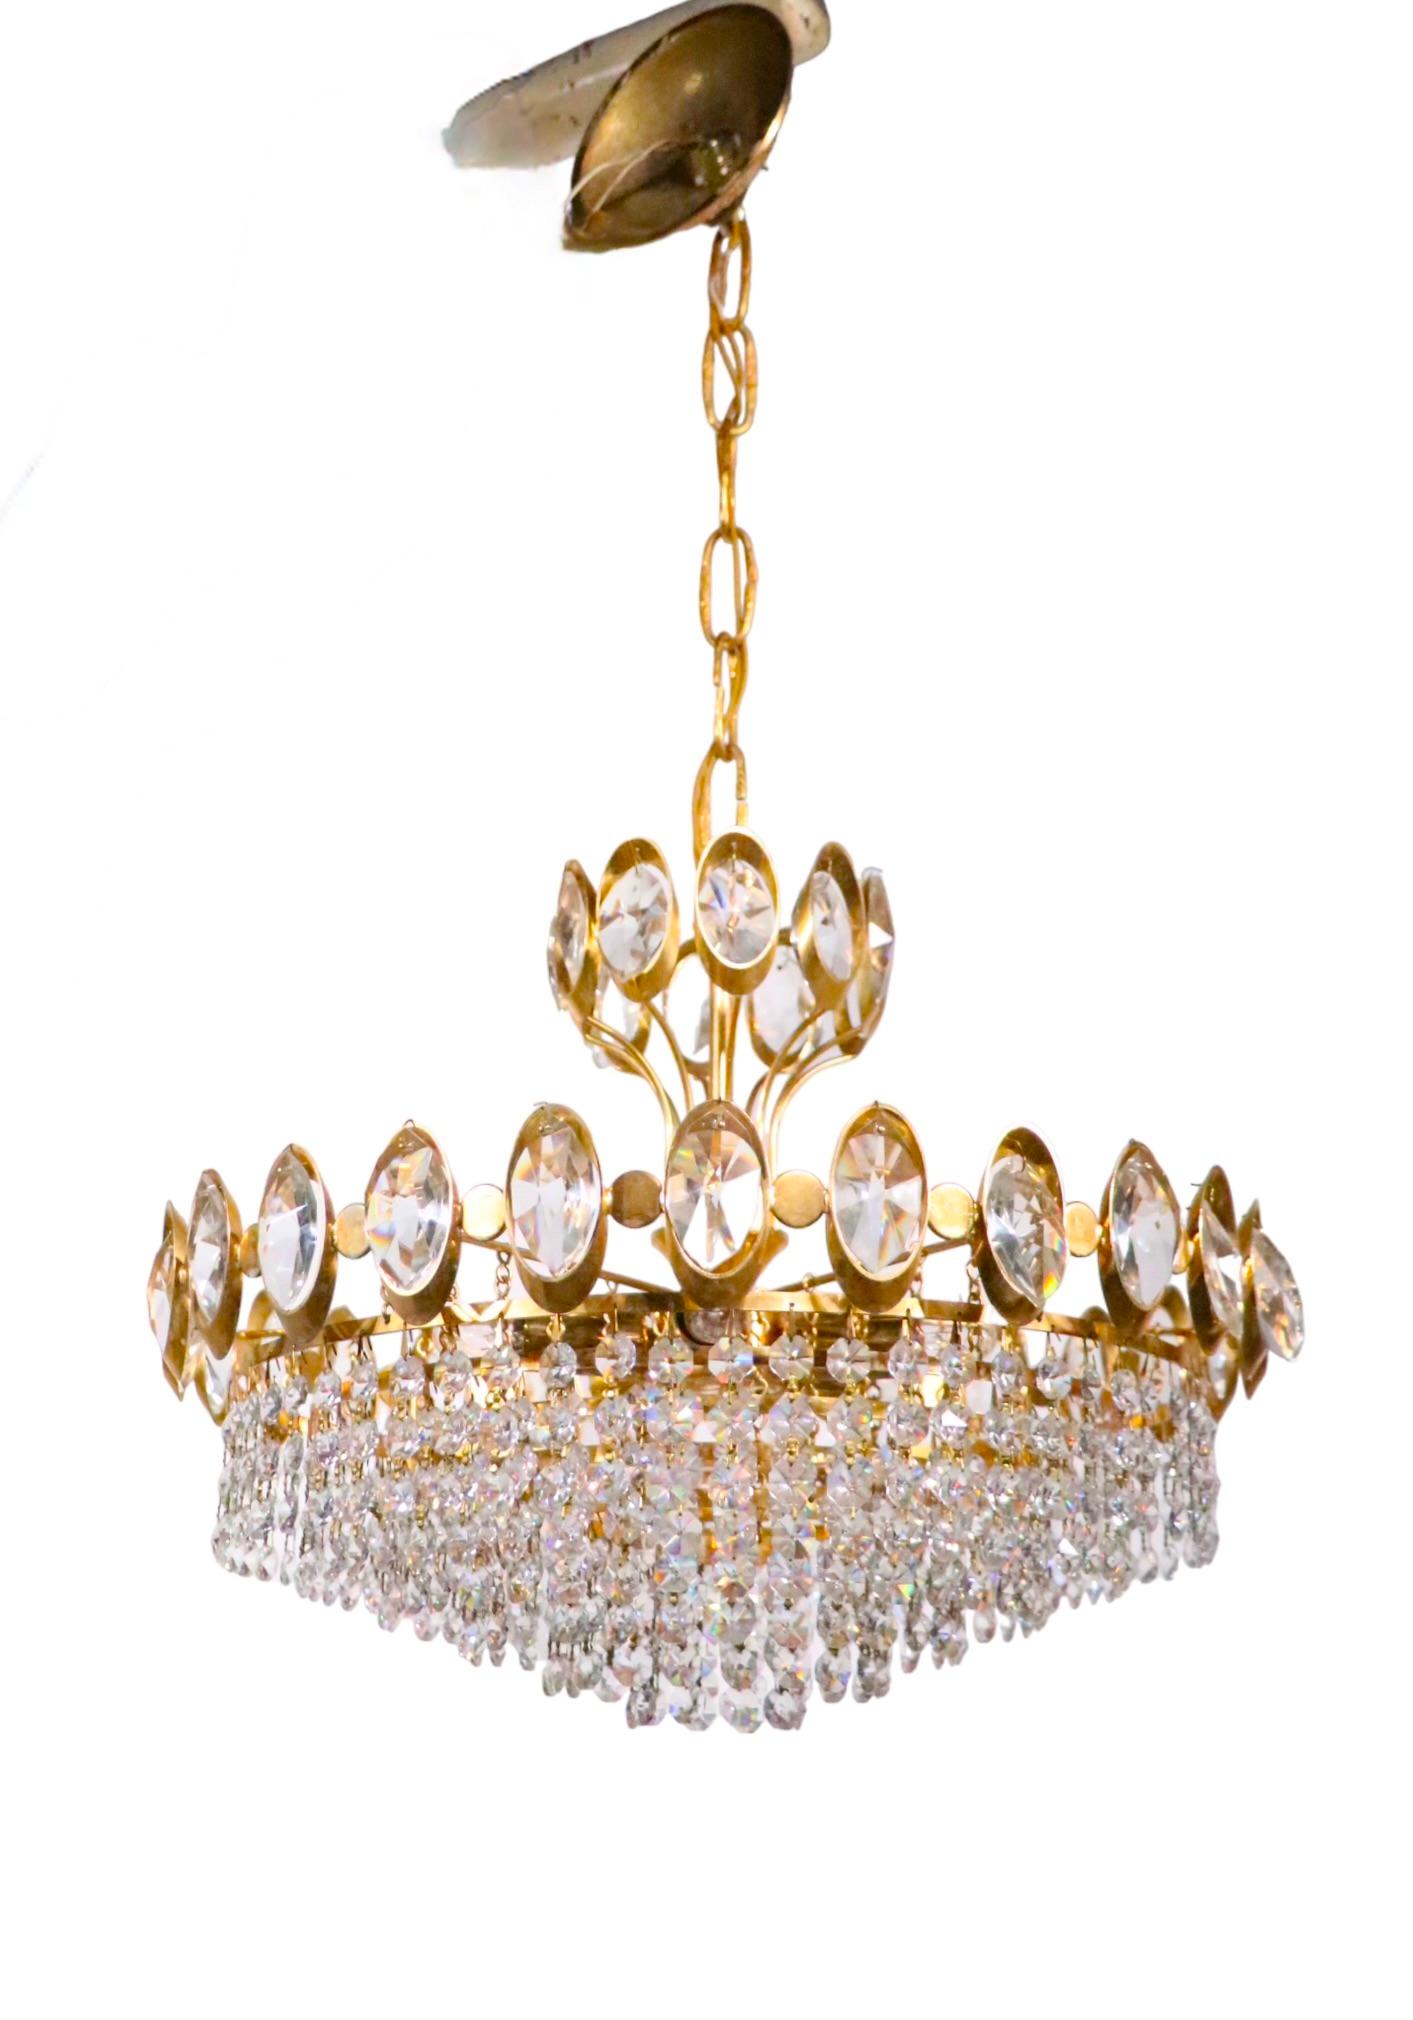 Crystal and Gold Hollywood Regency Style Chandelier by Sciolari For Sale 1